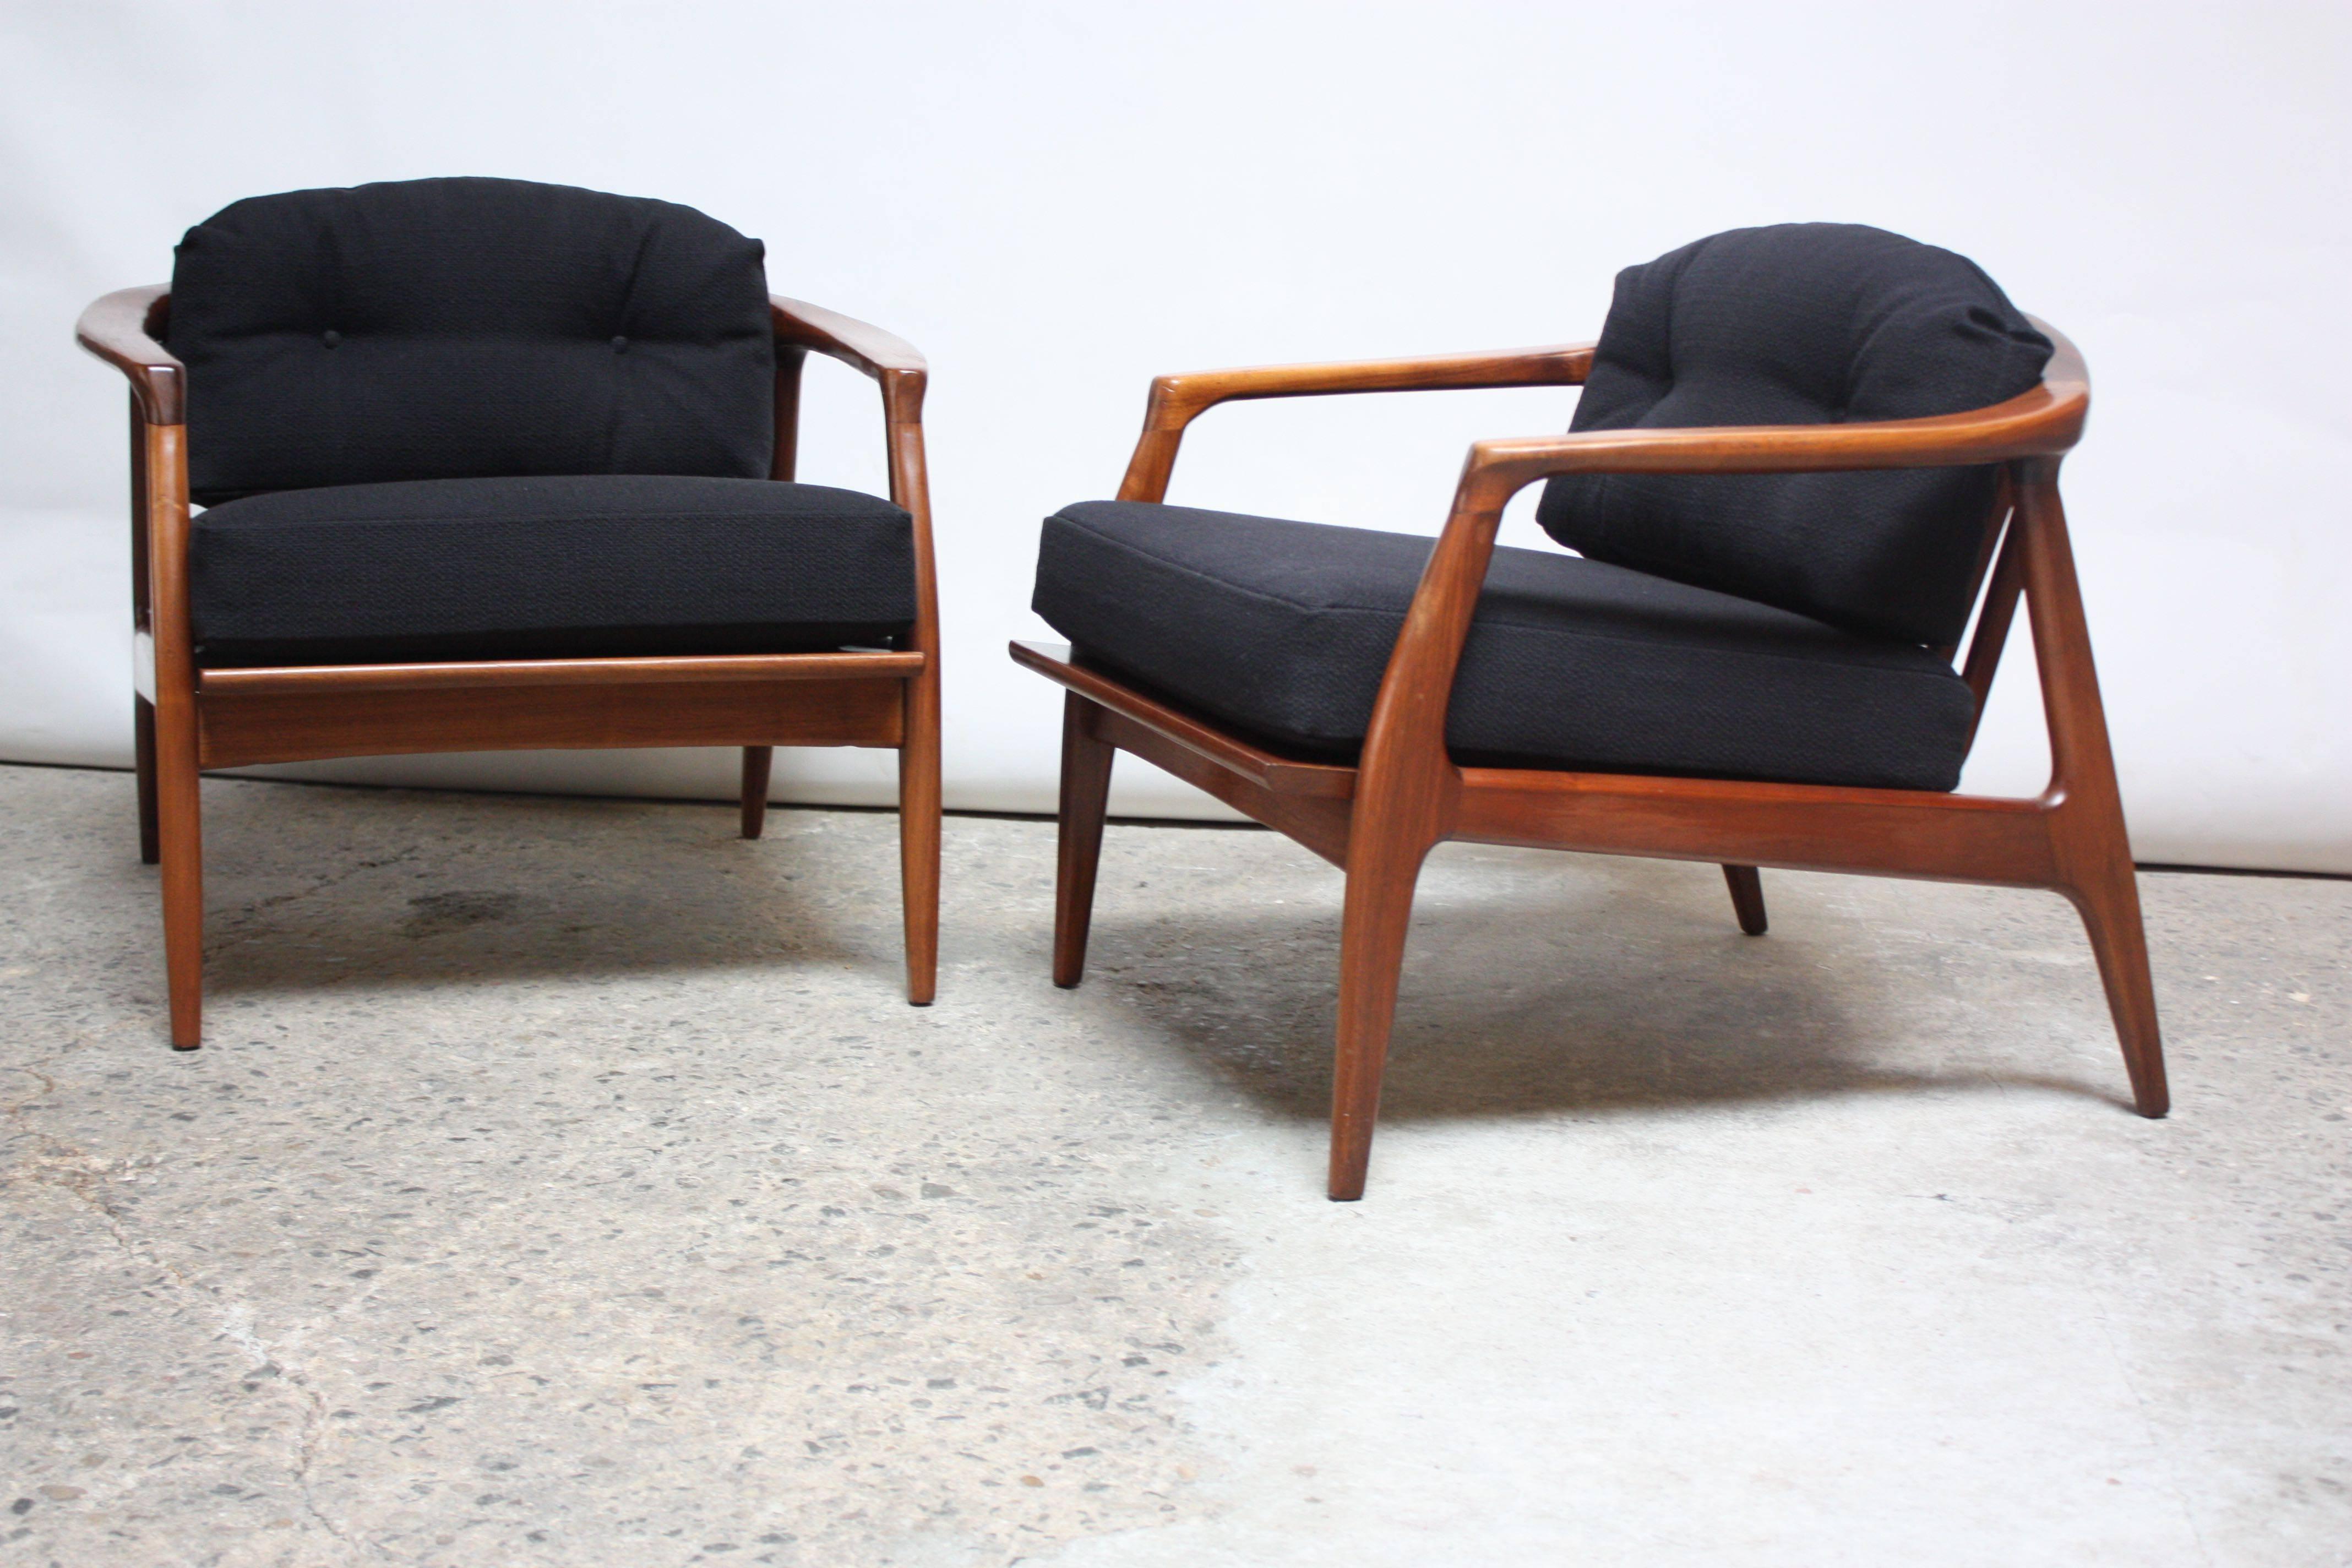 These Milo Baughman armchairs feature dramatic, clean lines. The exaggerated, slanted legs are nicely contrasted by a curved back with simple stat supports.   
Thayer Coggin fabric tags are intact on both chairs. 
The fabric is a black tweed, and